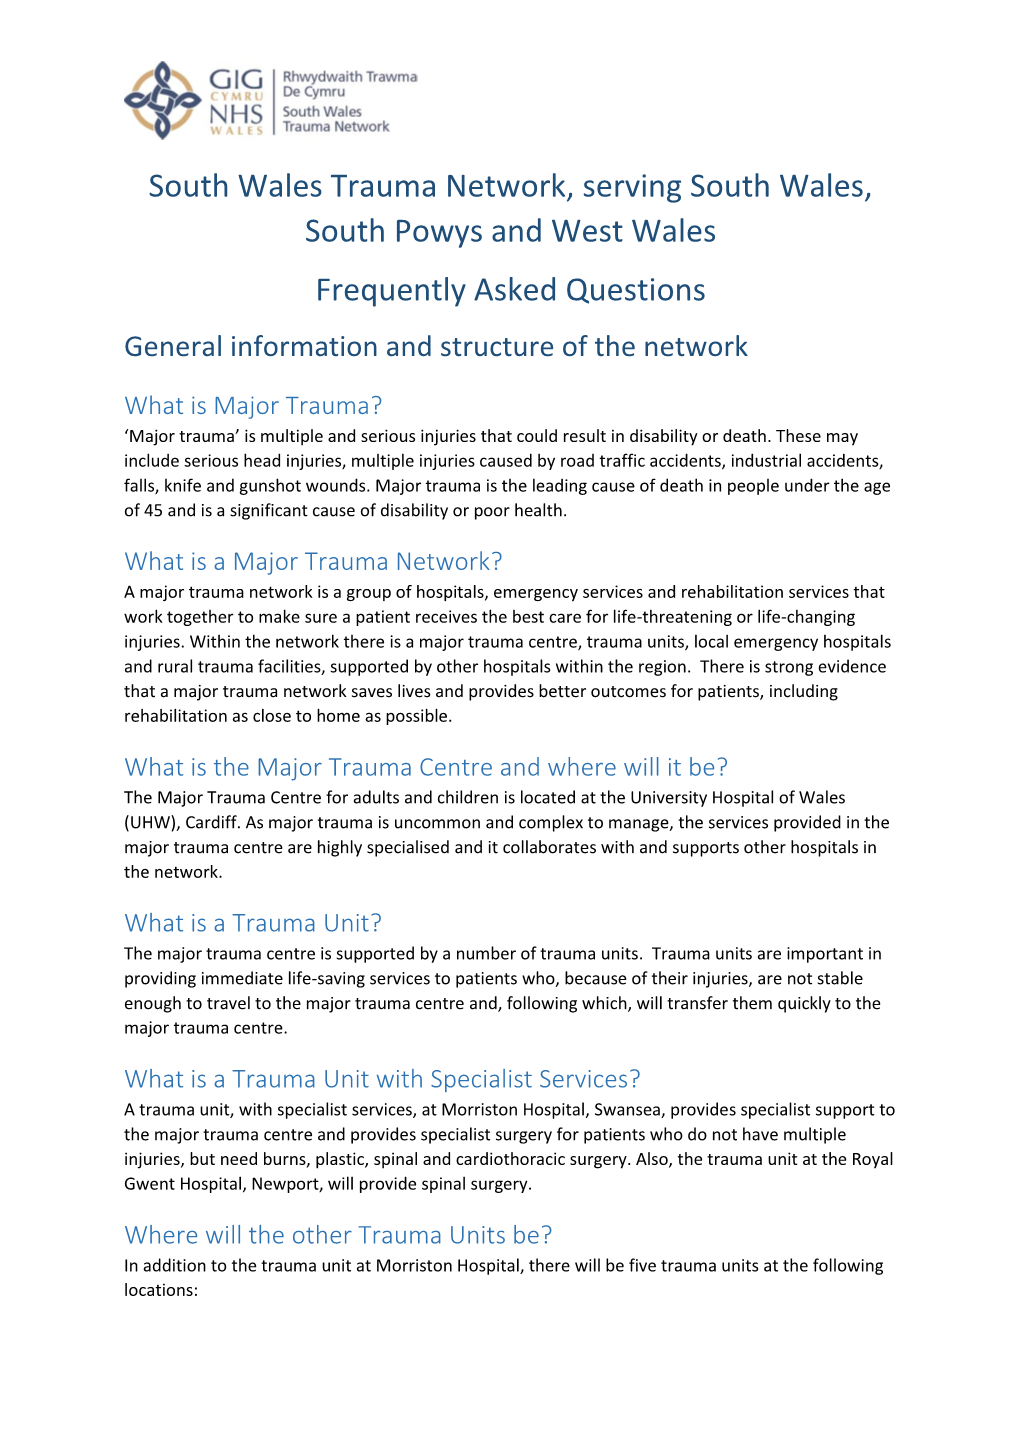 South Wales Trauma Network, Serving South Wales, South Powys and West Wales Frequently Asked Questions General Information and Structure of the Network